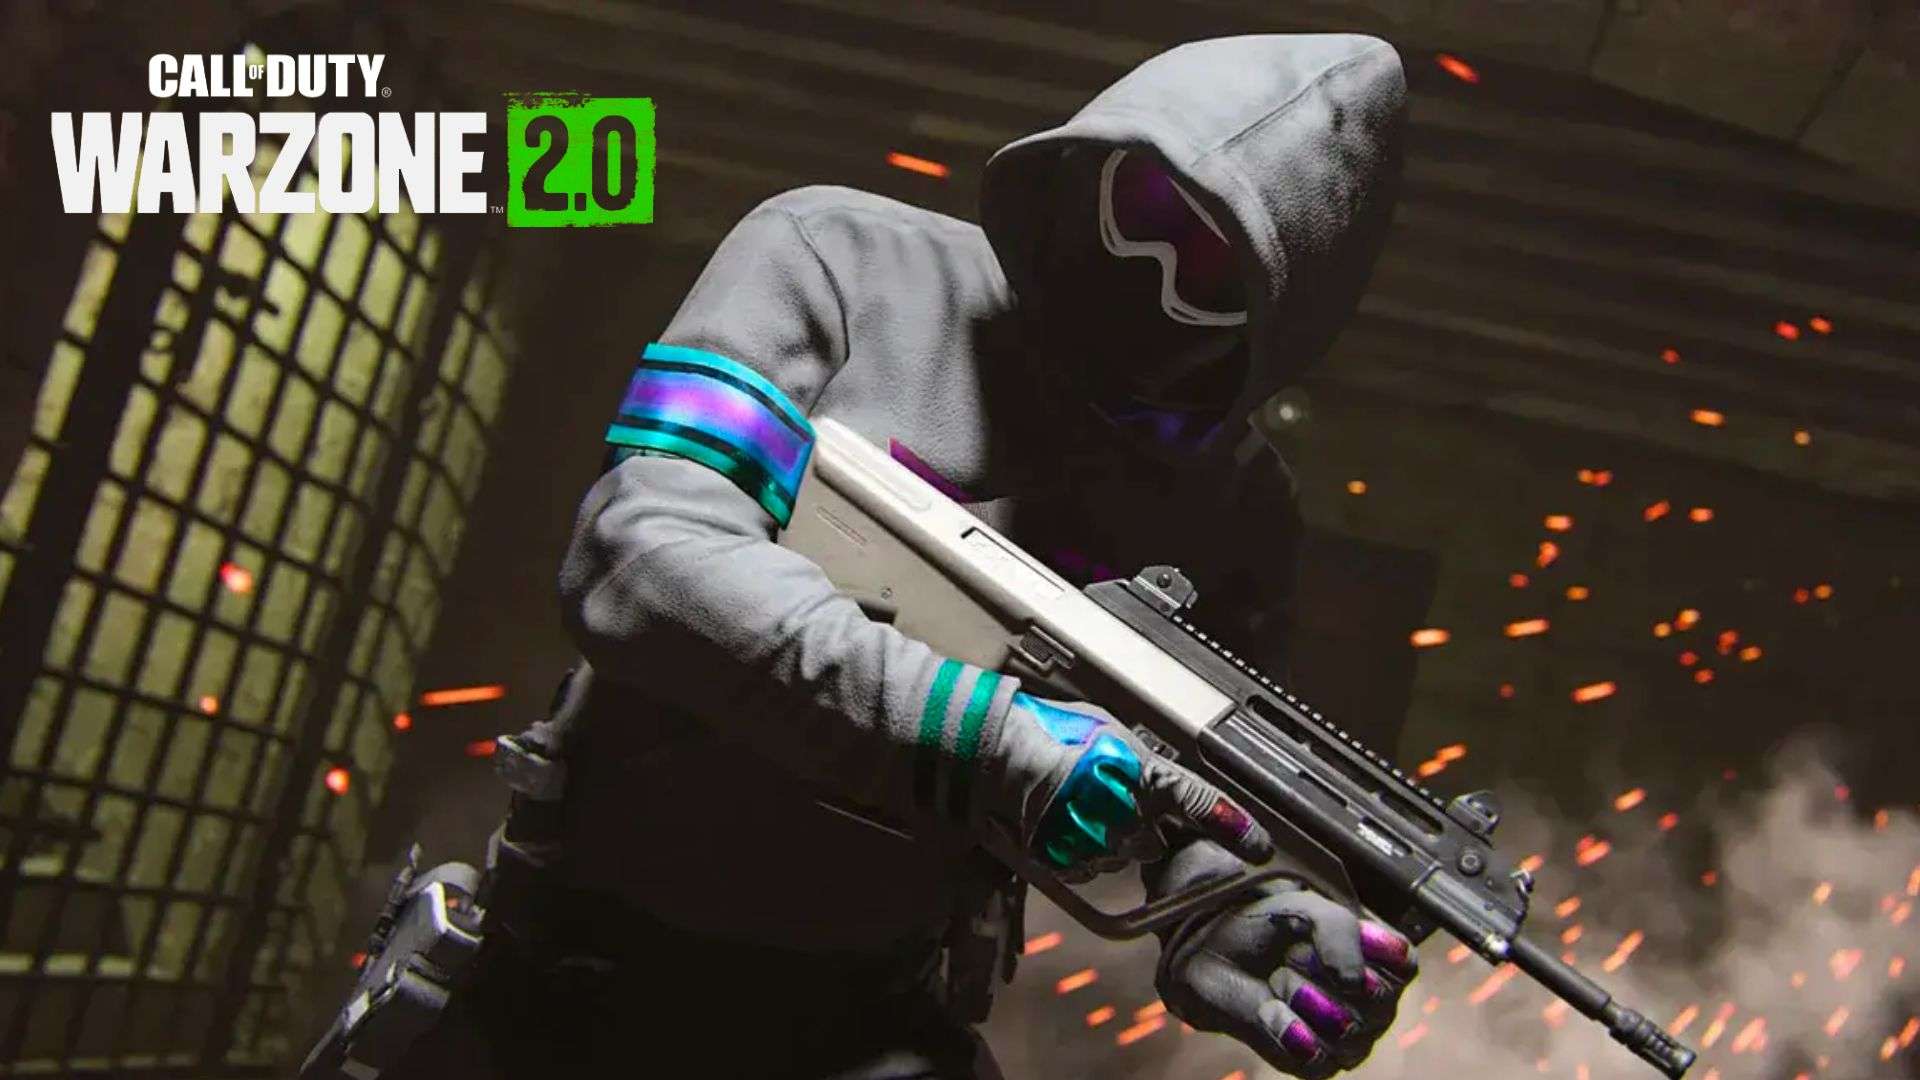 Warzone character in grey and purple skin holding gun next to flames